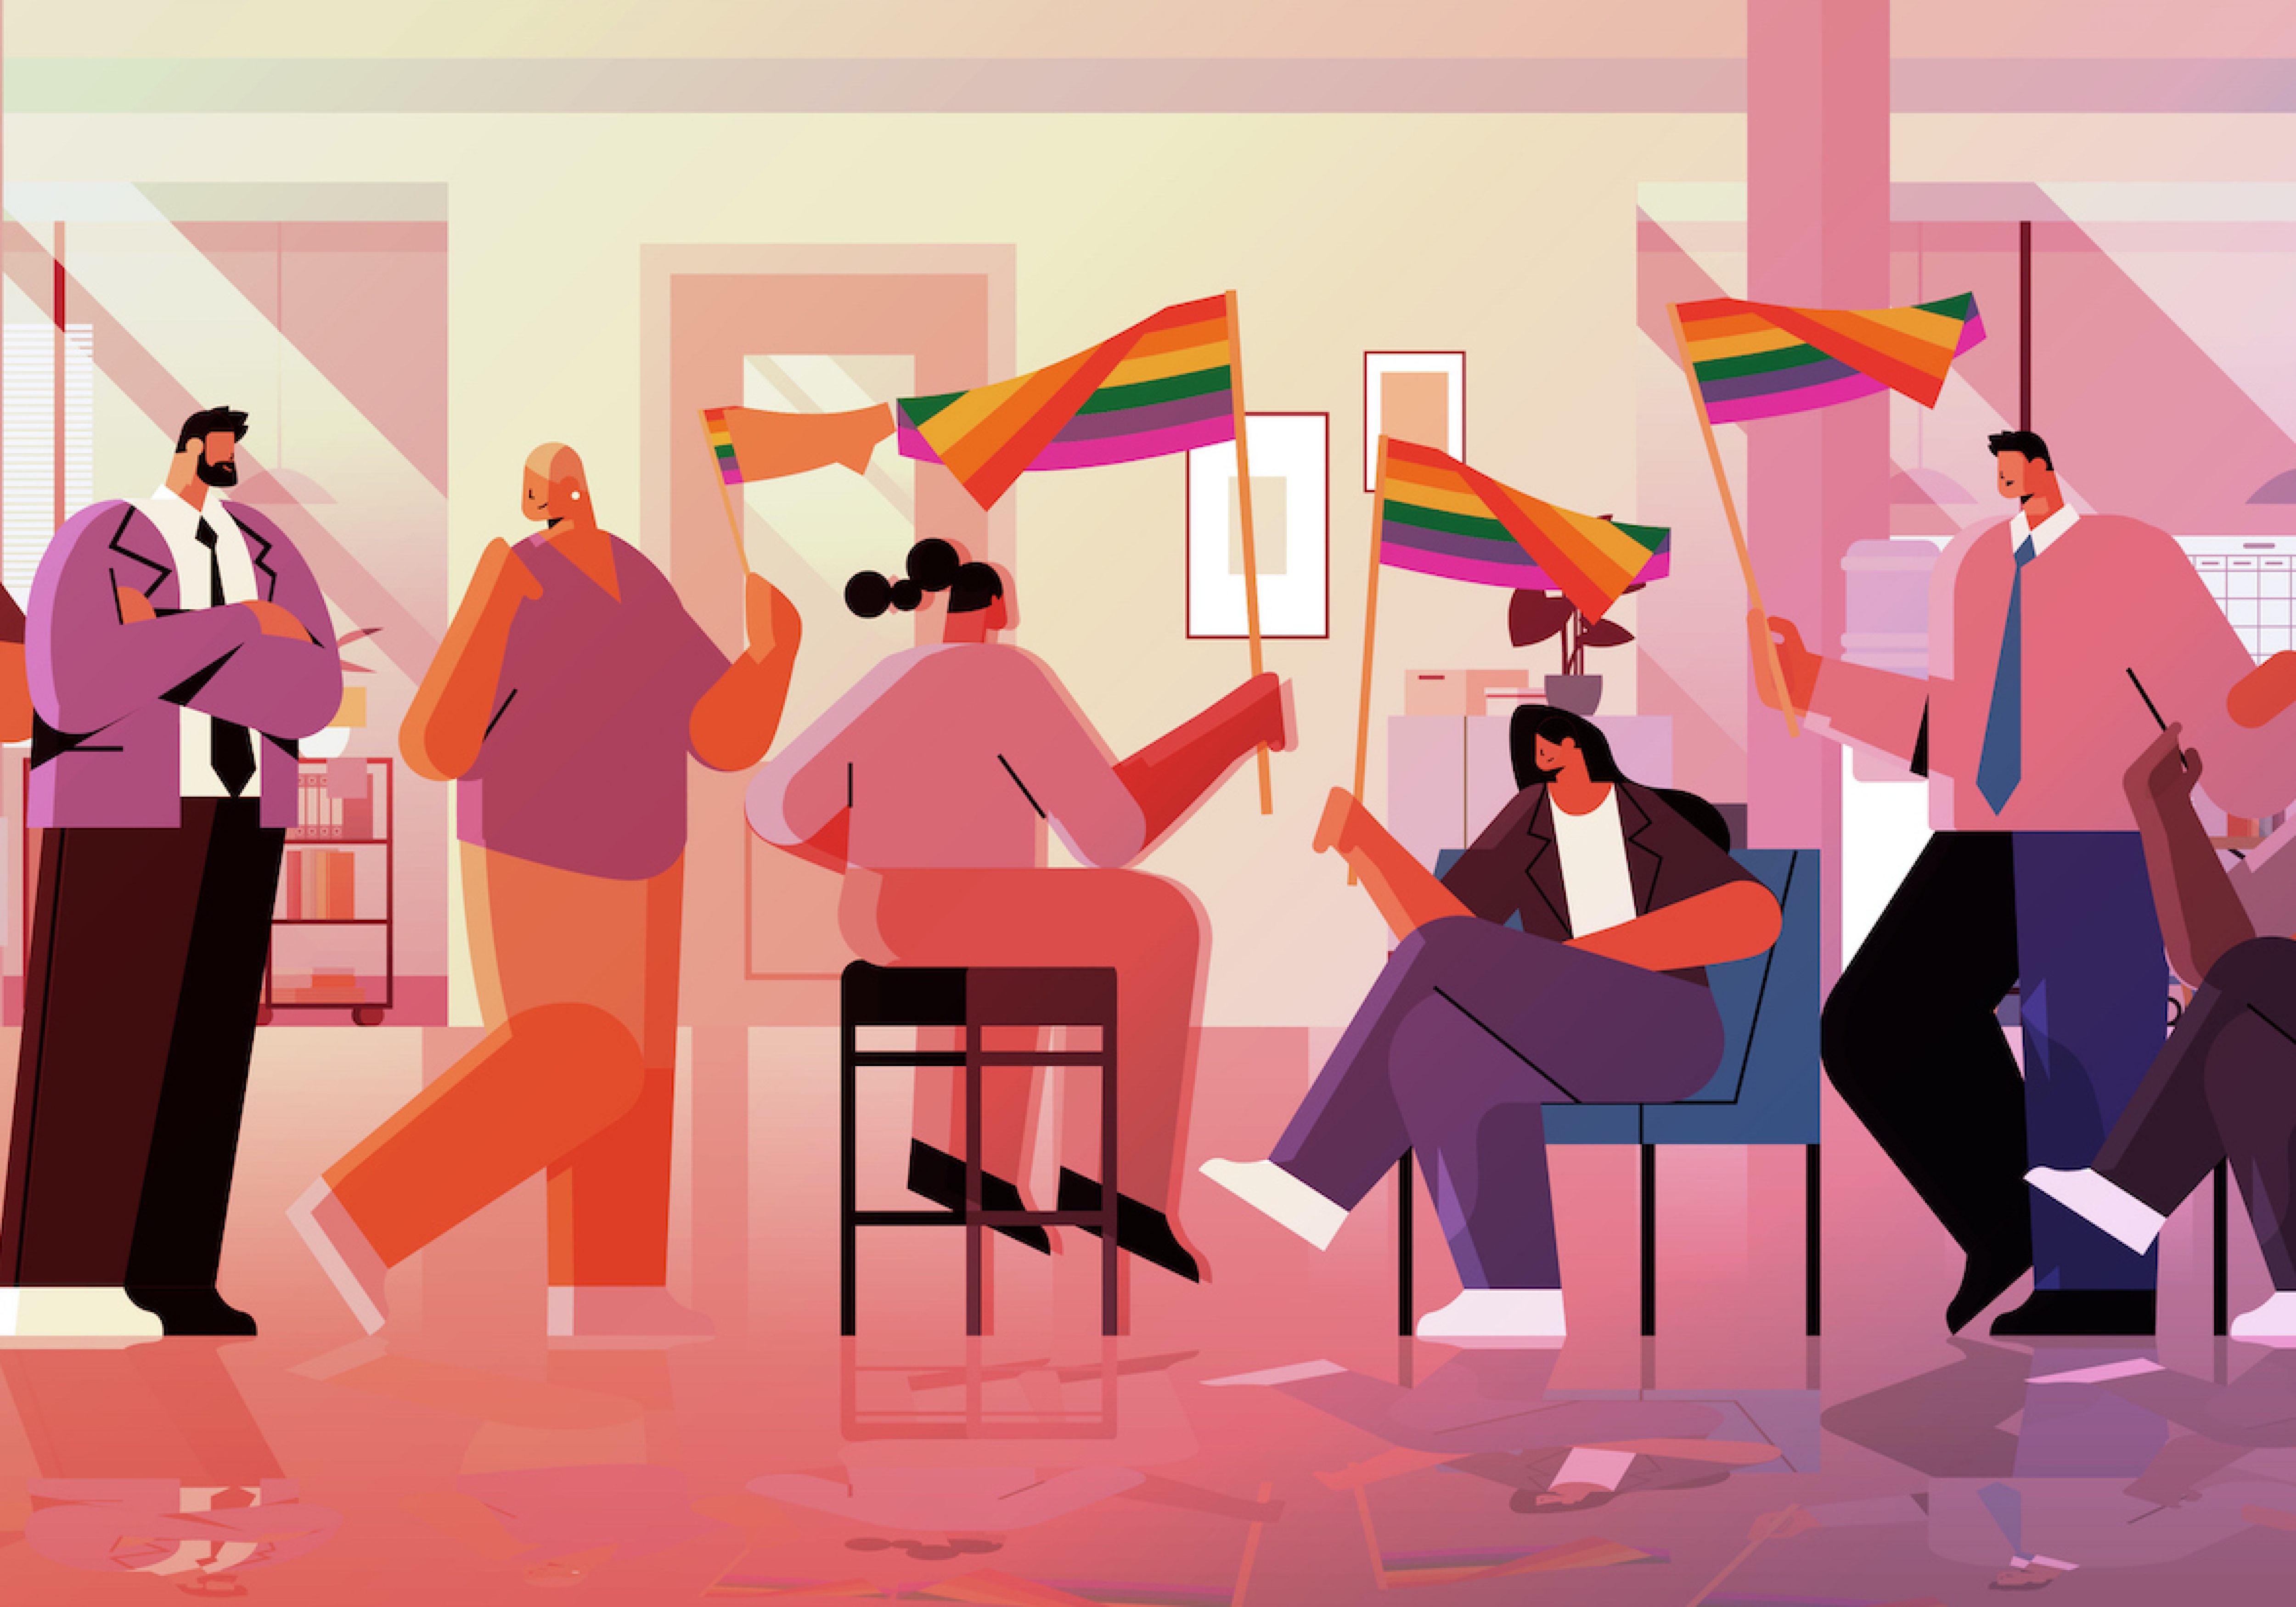 Business Impact: How to spot truly LGBTQ+ inclusive organisations